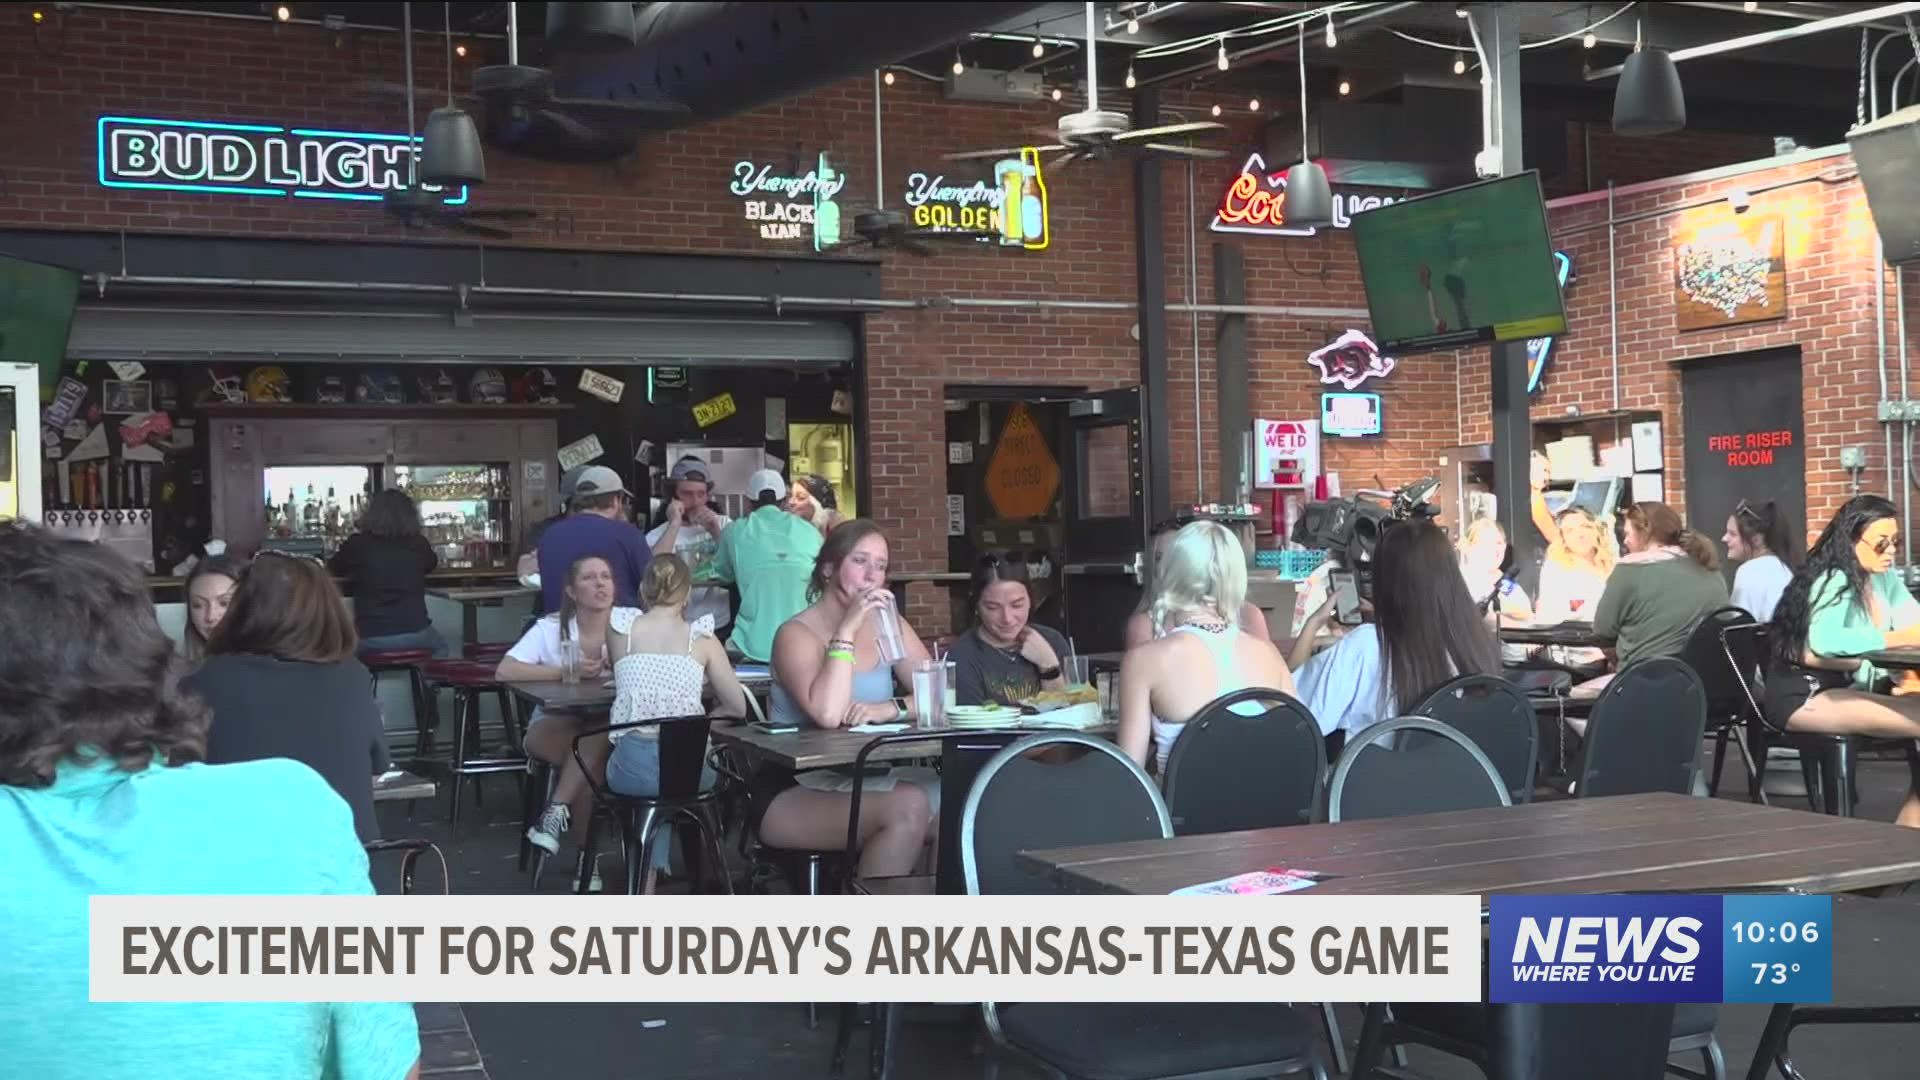 Local businesses are preparing for Texas vs Razorback game this weekend.